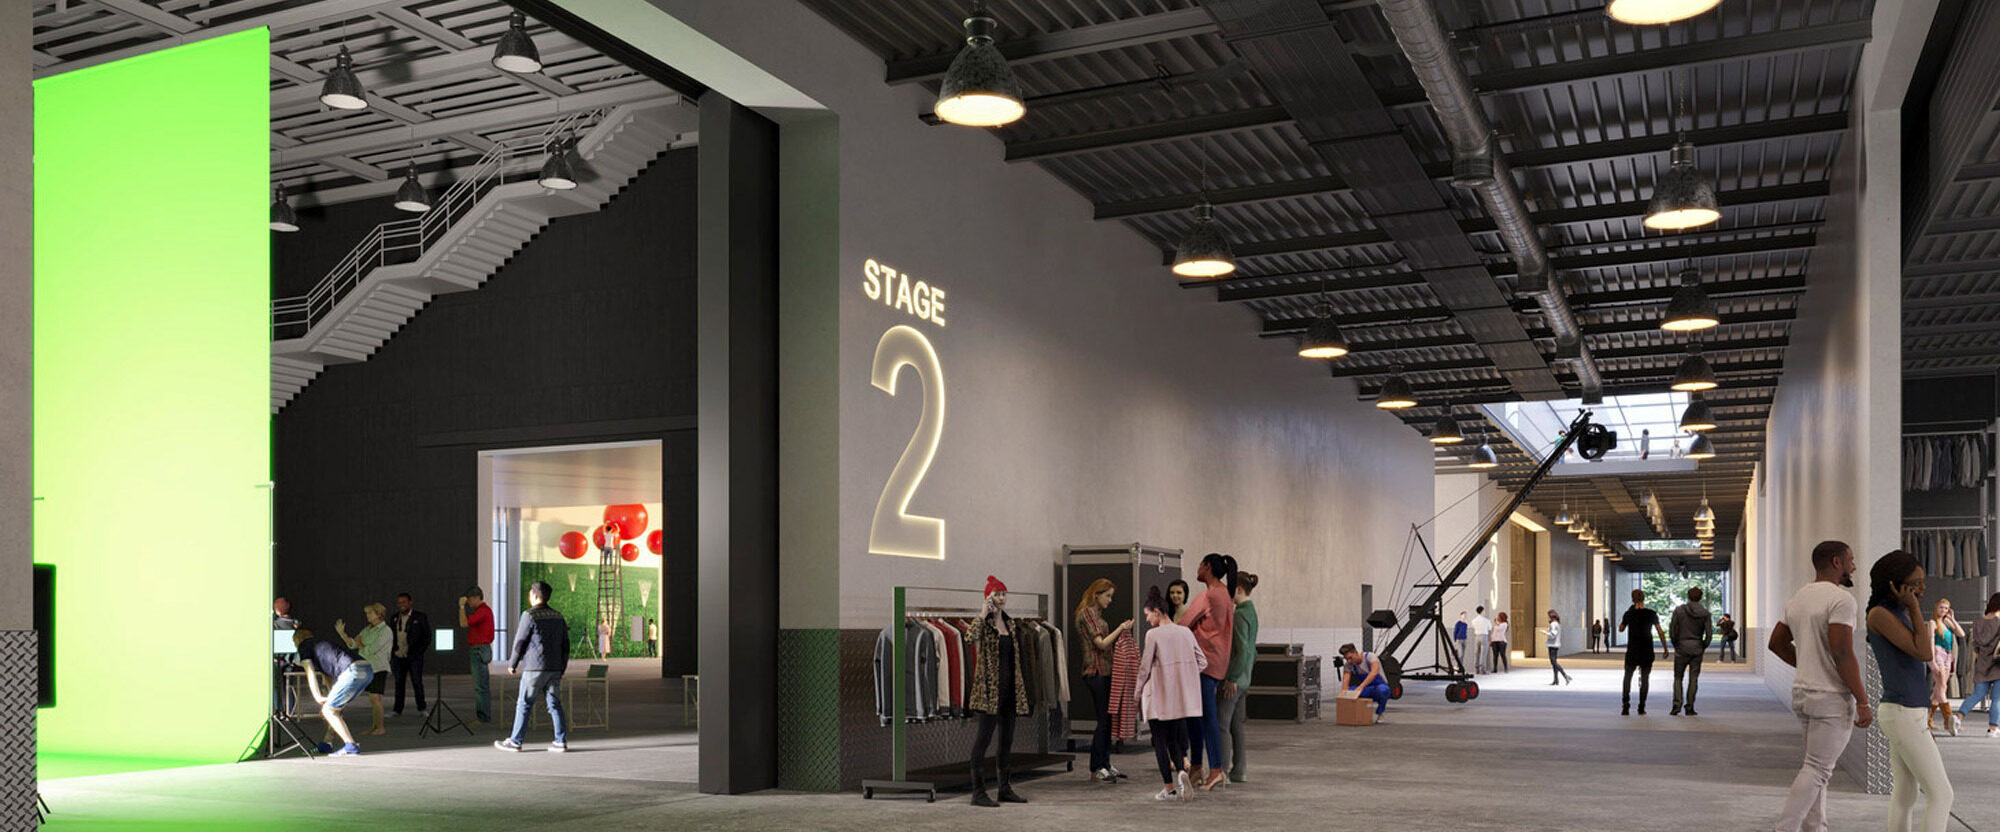 Modern industrial-style open space rendering featuring high ceilings with exposed ductwork, polished concrete floors, and a prominent green accent wall. Activity bustles among seating areas and art installations, underlined by sleek track lighting.